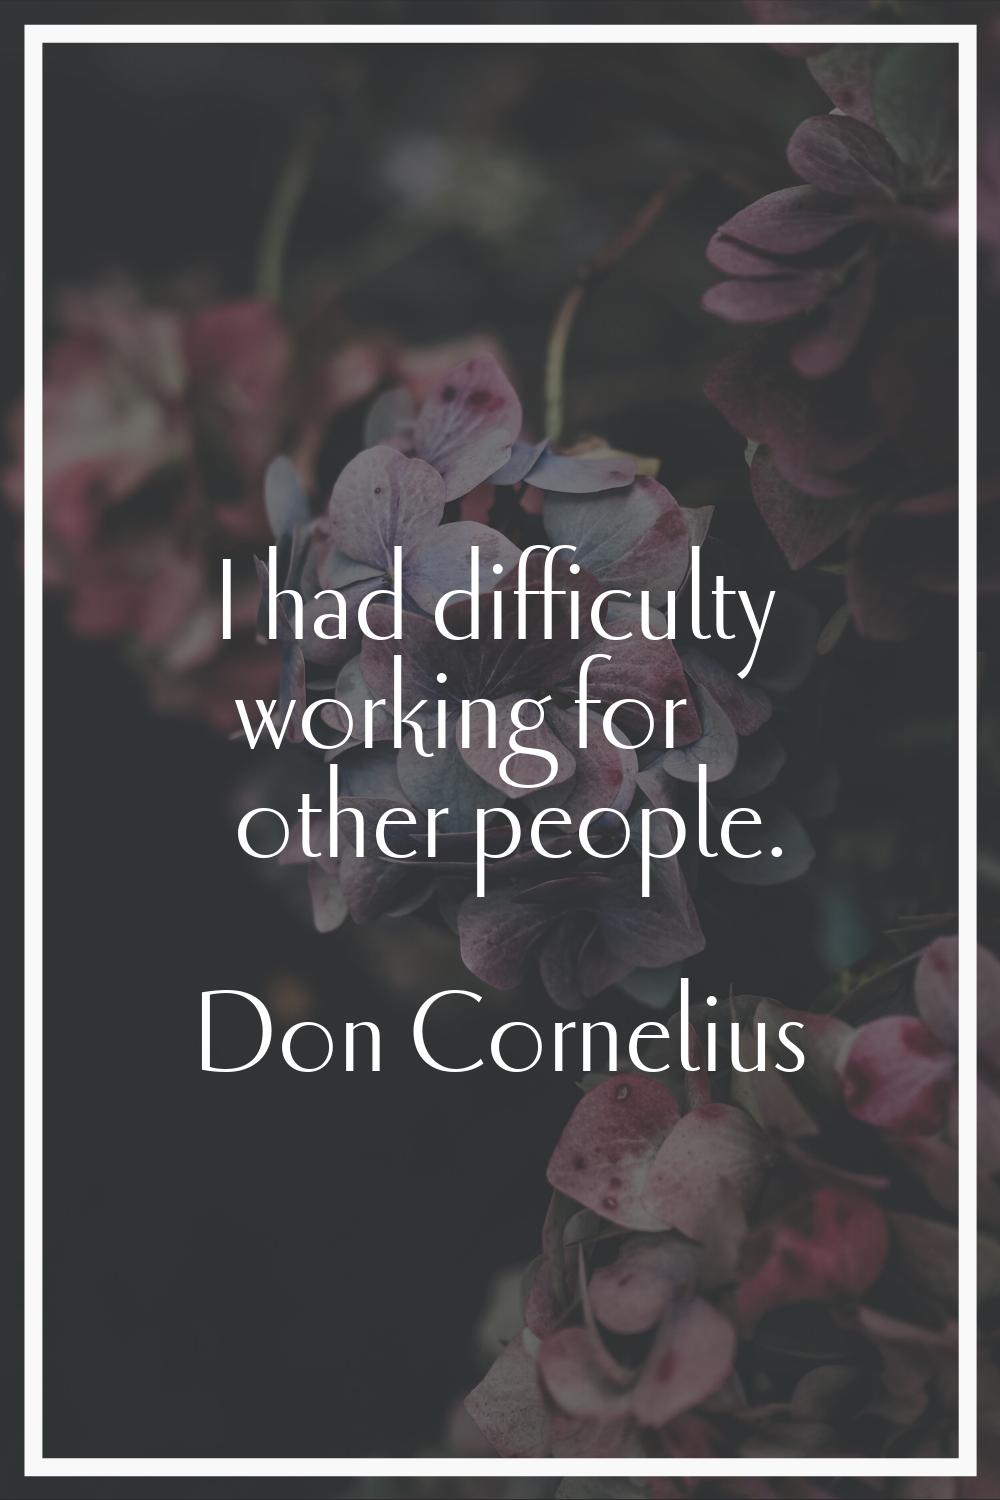 I had difficulty working for other people.